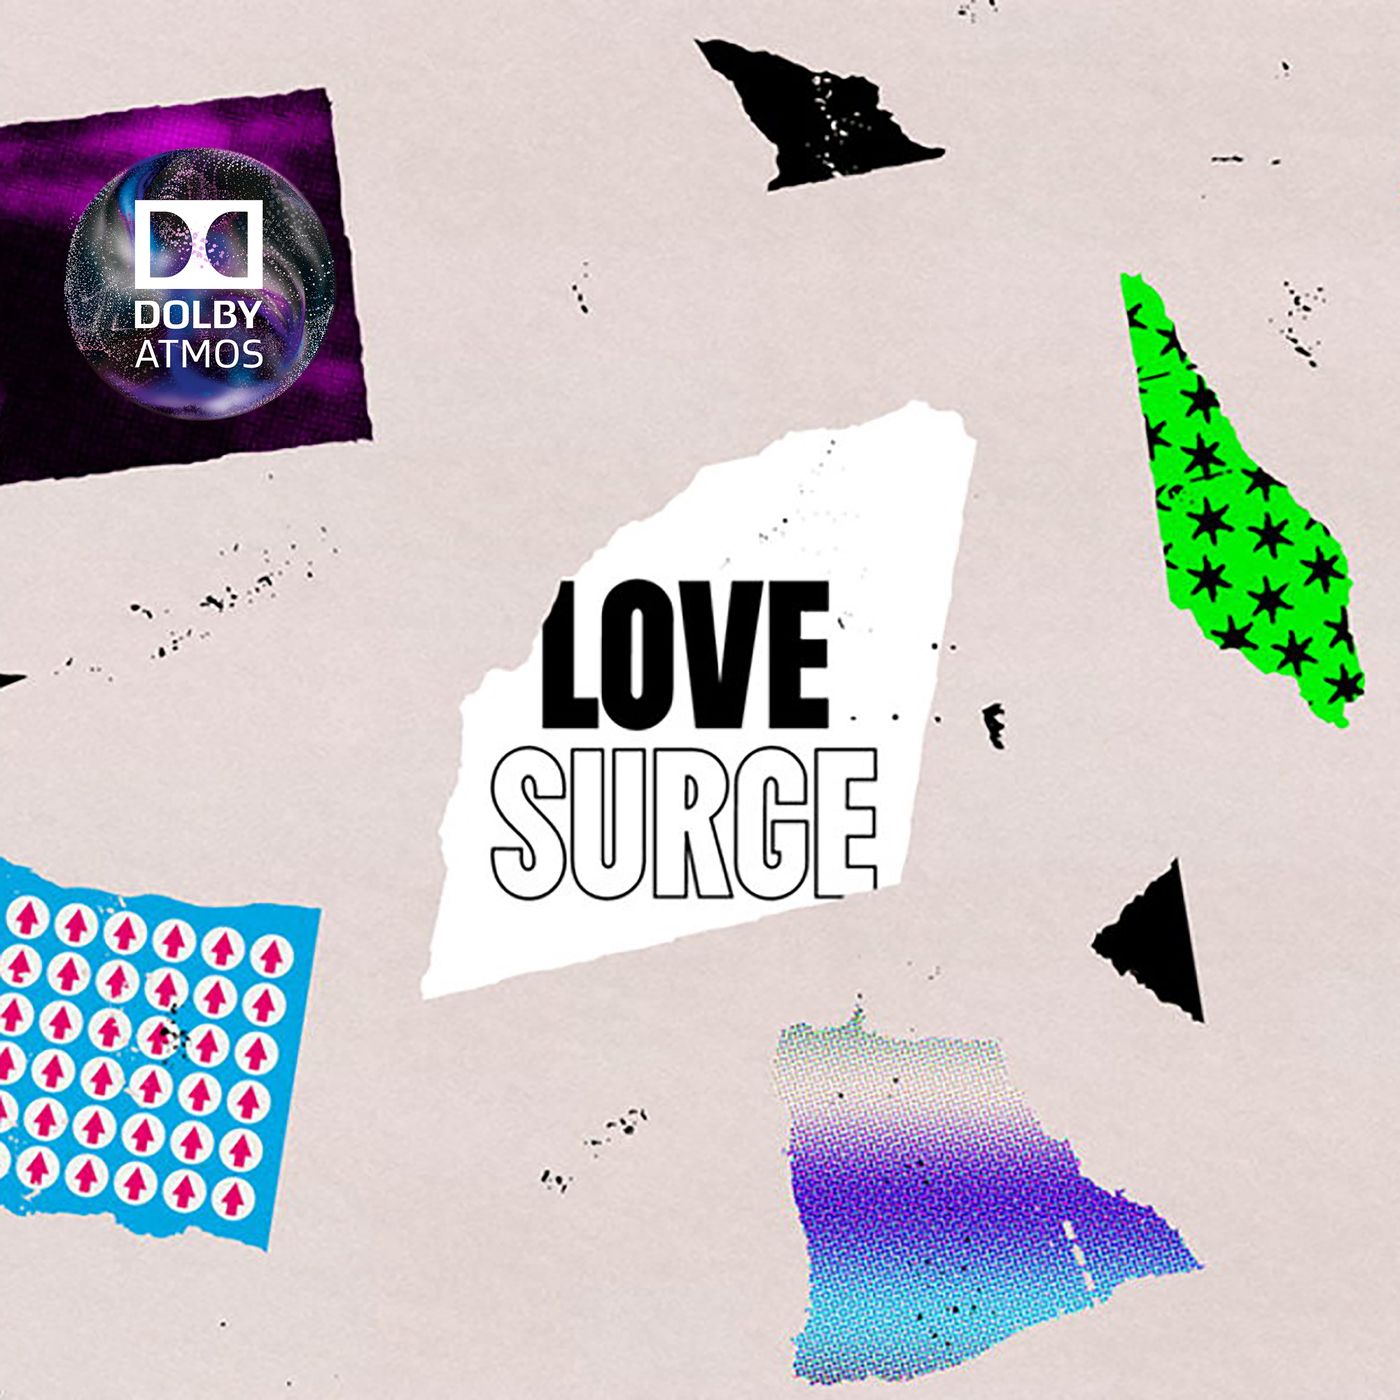 081 Love Surge FESTIVAL By SessionsLive 3HITSMIXED - Taxi - Melon Diesel